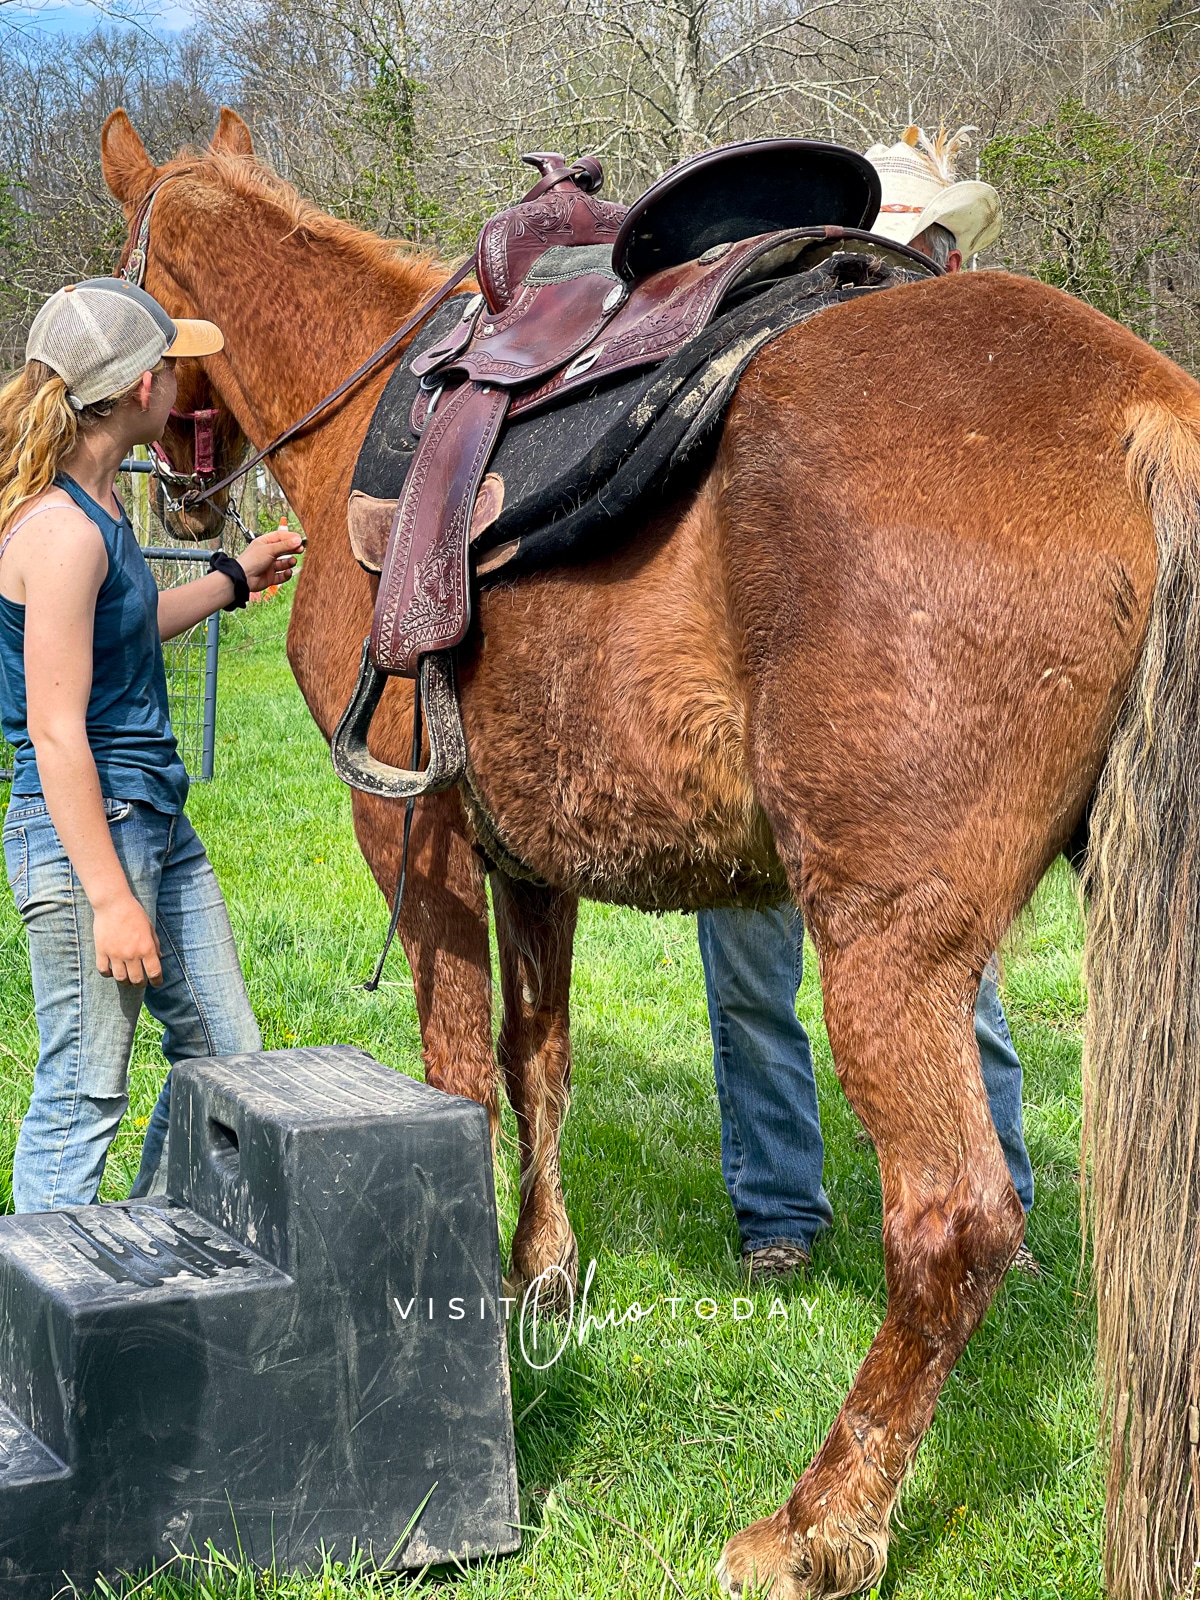 lady standing next to a furry brown horse. Photo credit: Cindy Gordon of VisitOhioToday.com